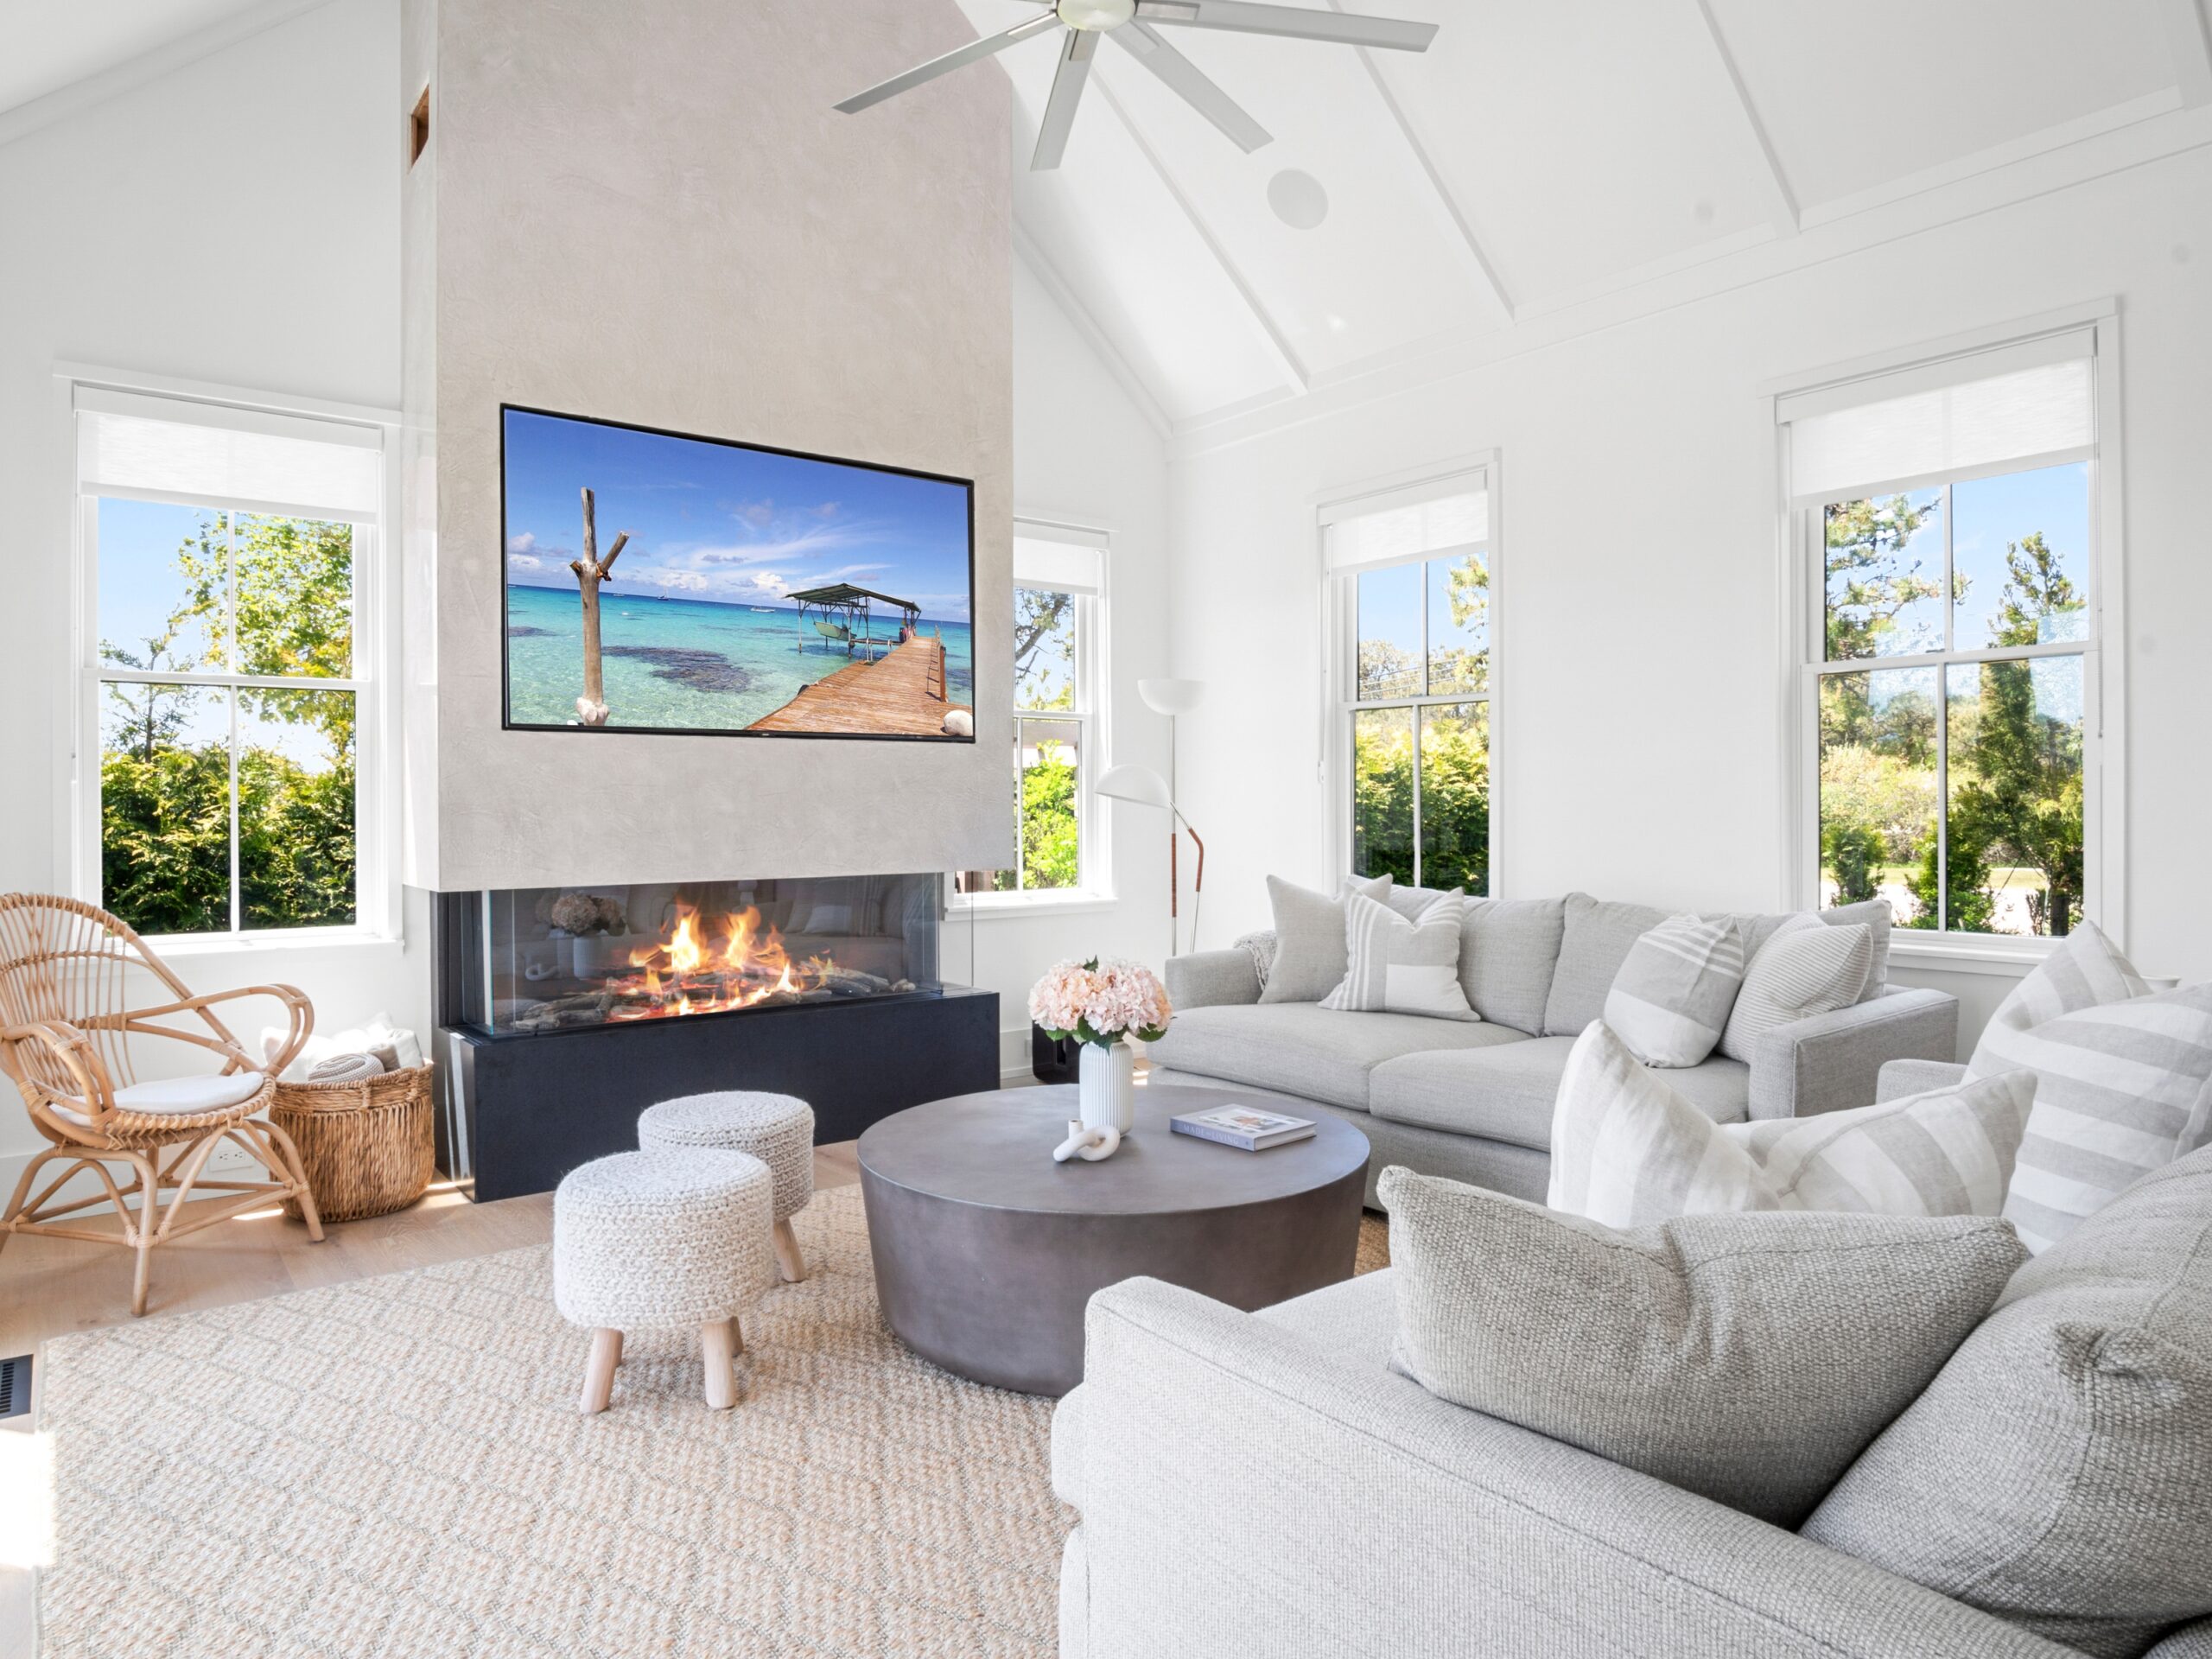 Professional real estate pictures showcasing Nantucket properties.